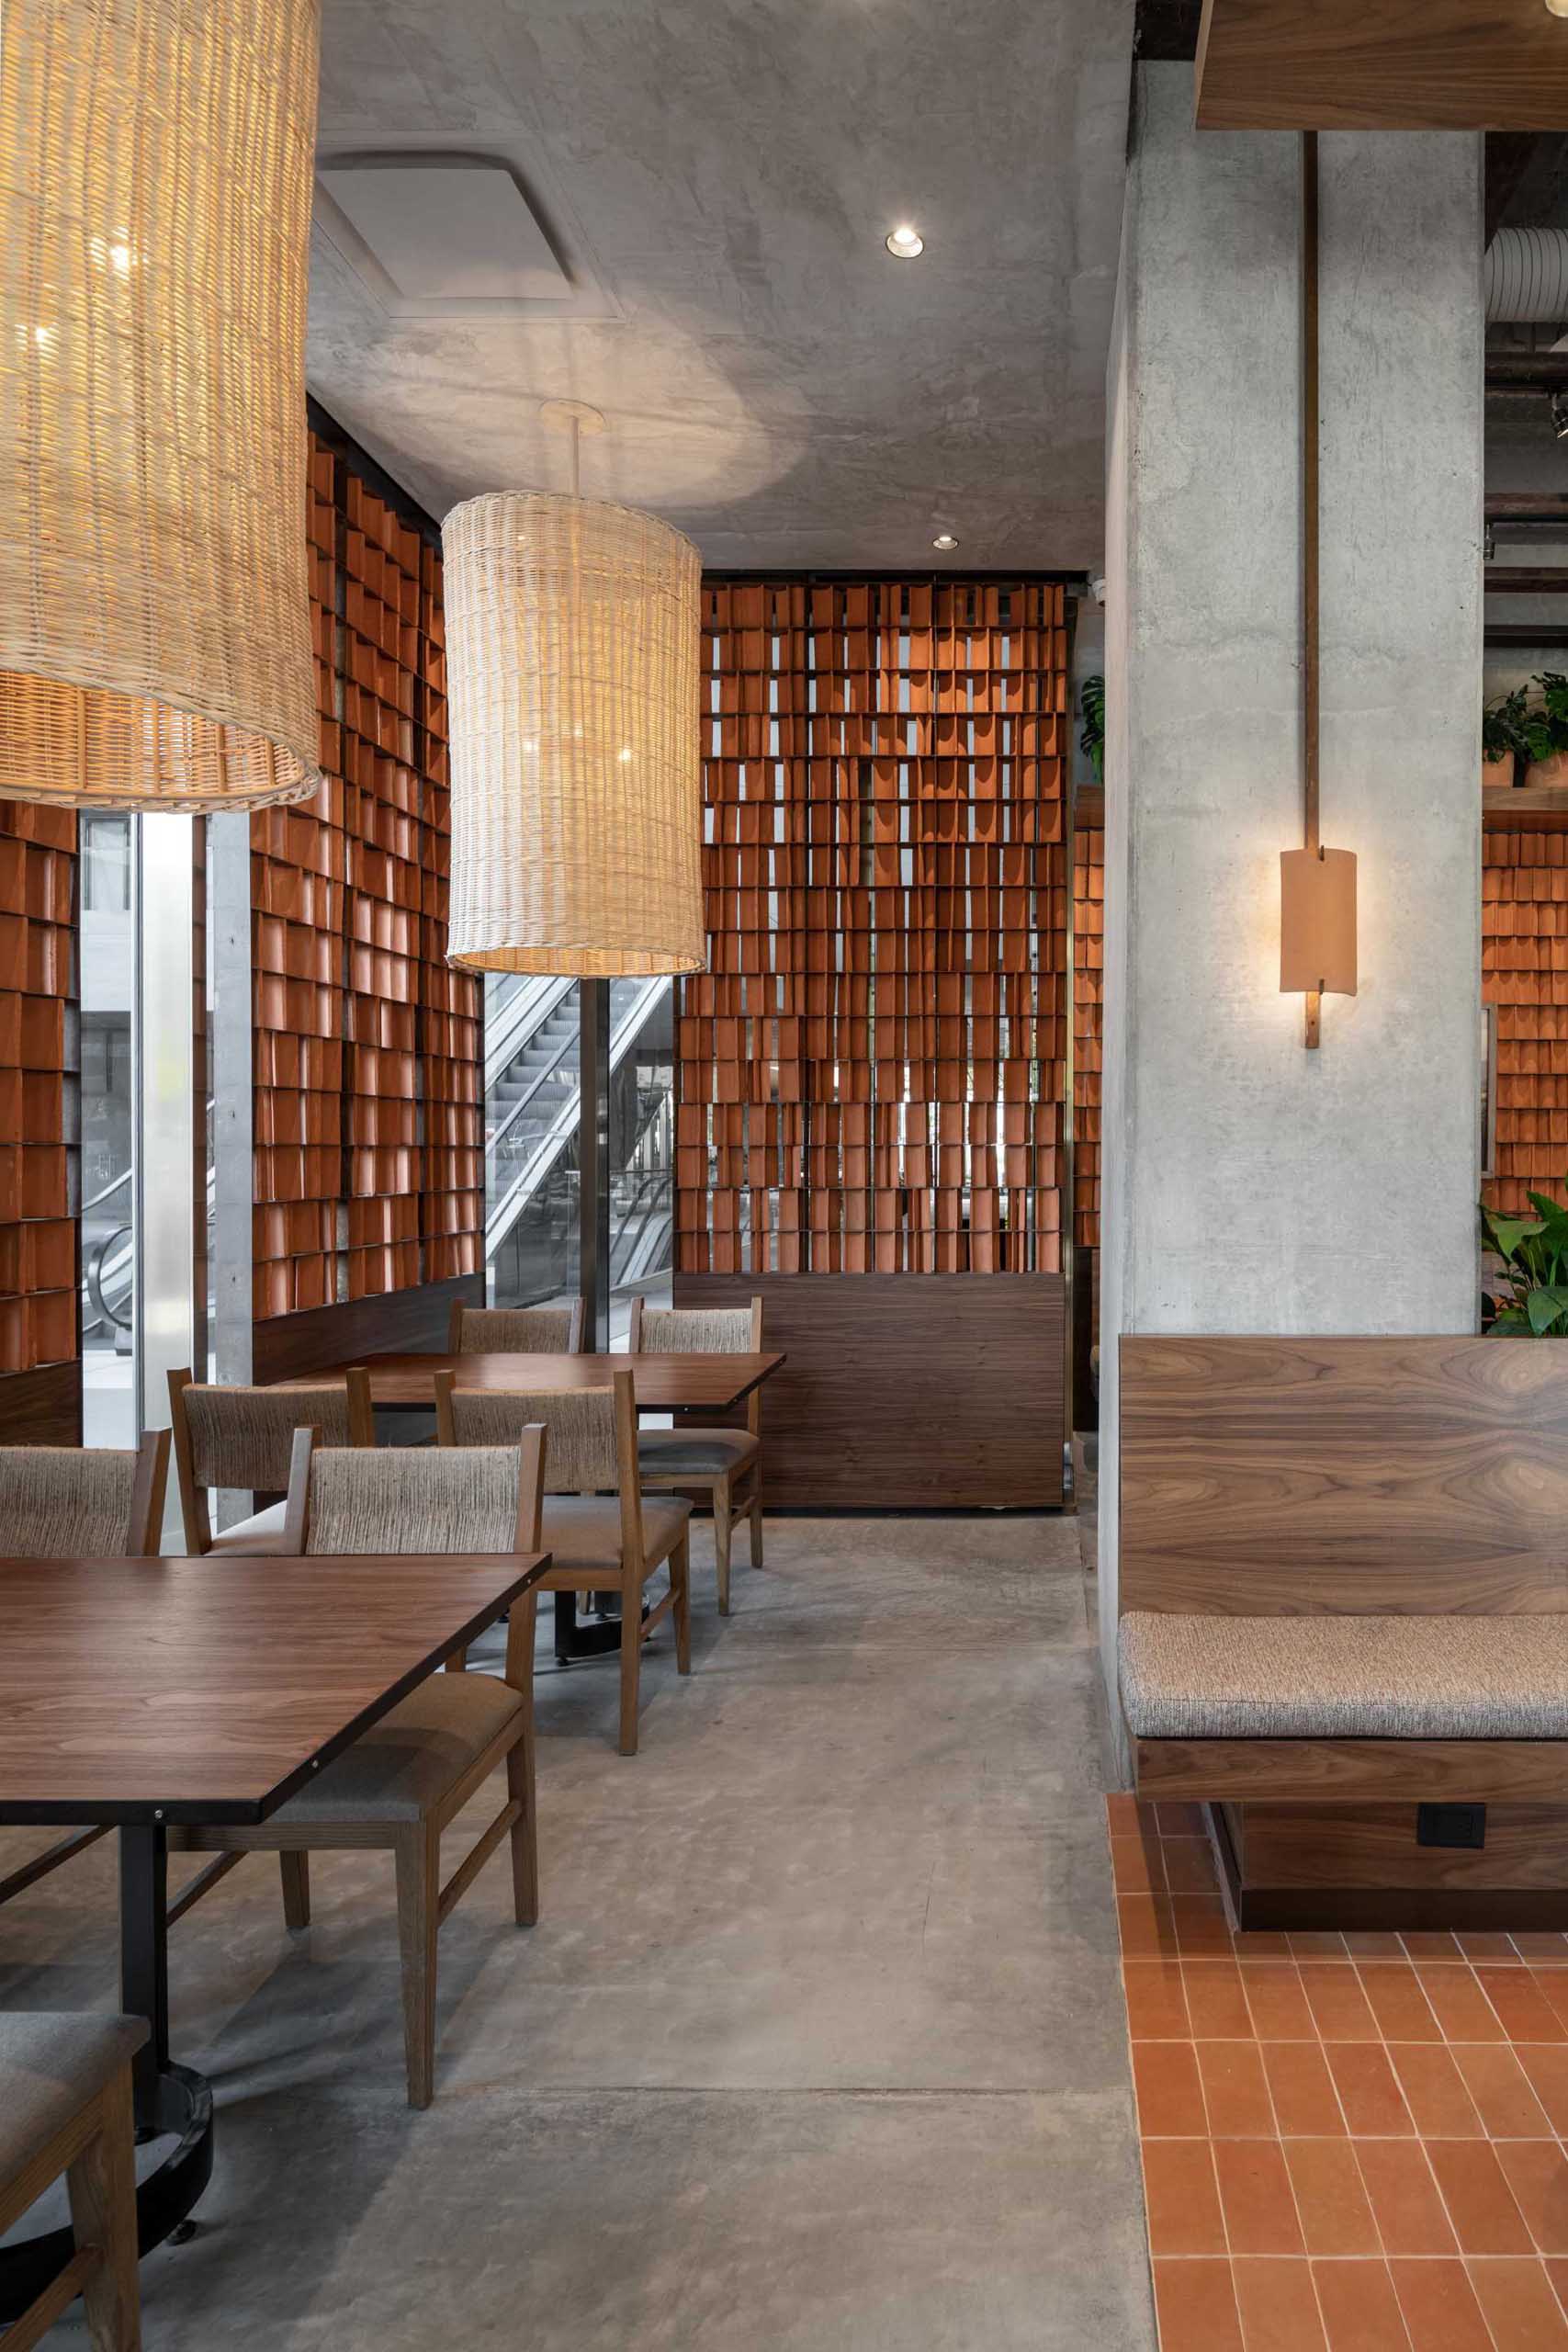 A modern coffee shop includes red clay tiles, wood, and raw concrete in its interior.